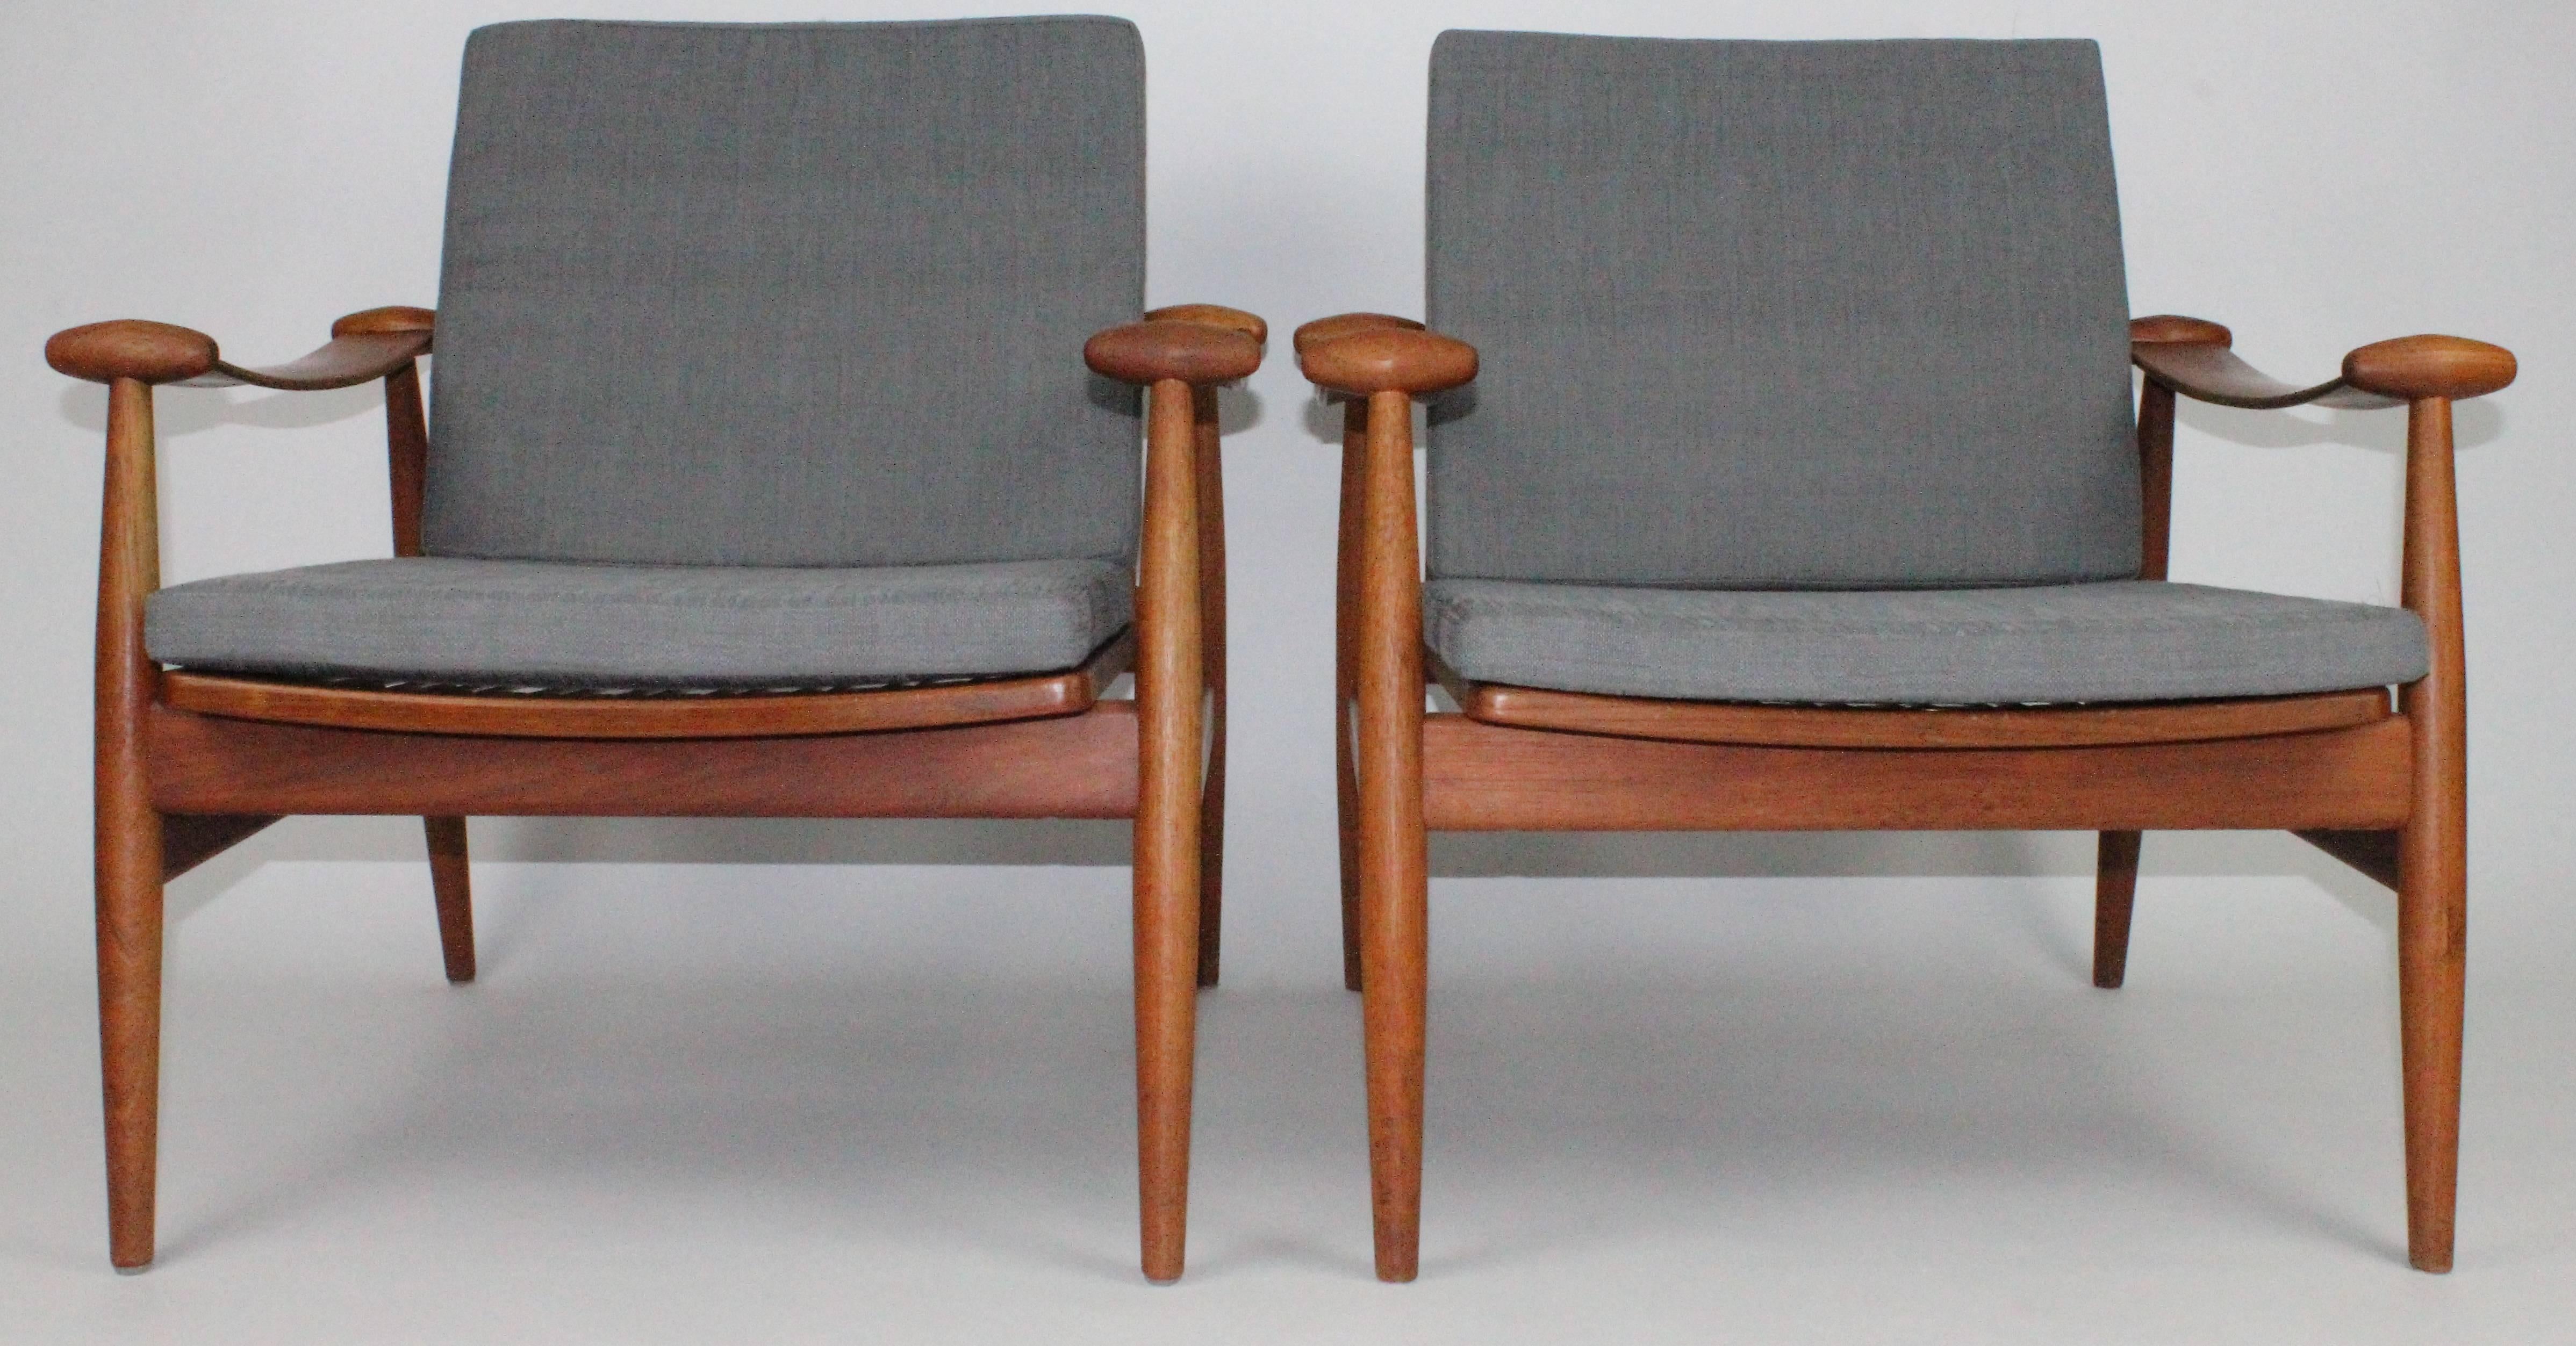 Wonderful pair of teak chairs by Danish designer Finn Juhl. These chairs were made by the original maker France & Daverkosen. The firm changed their name in 1957 to France & Son. These are early examples. The real name for these chairs are 